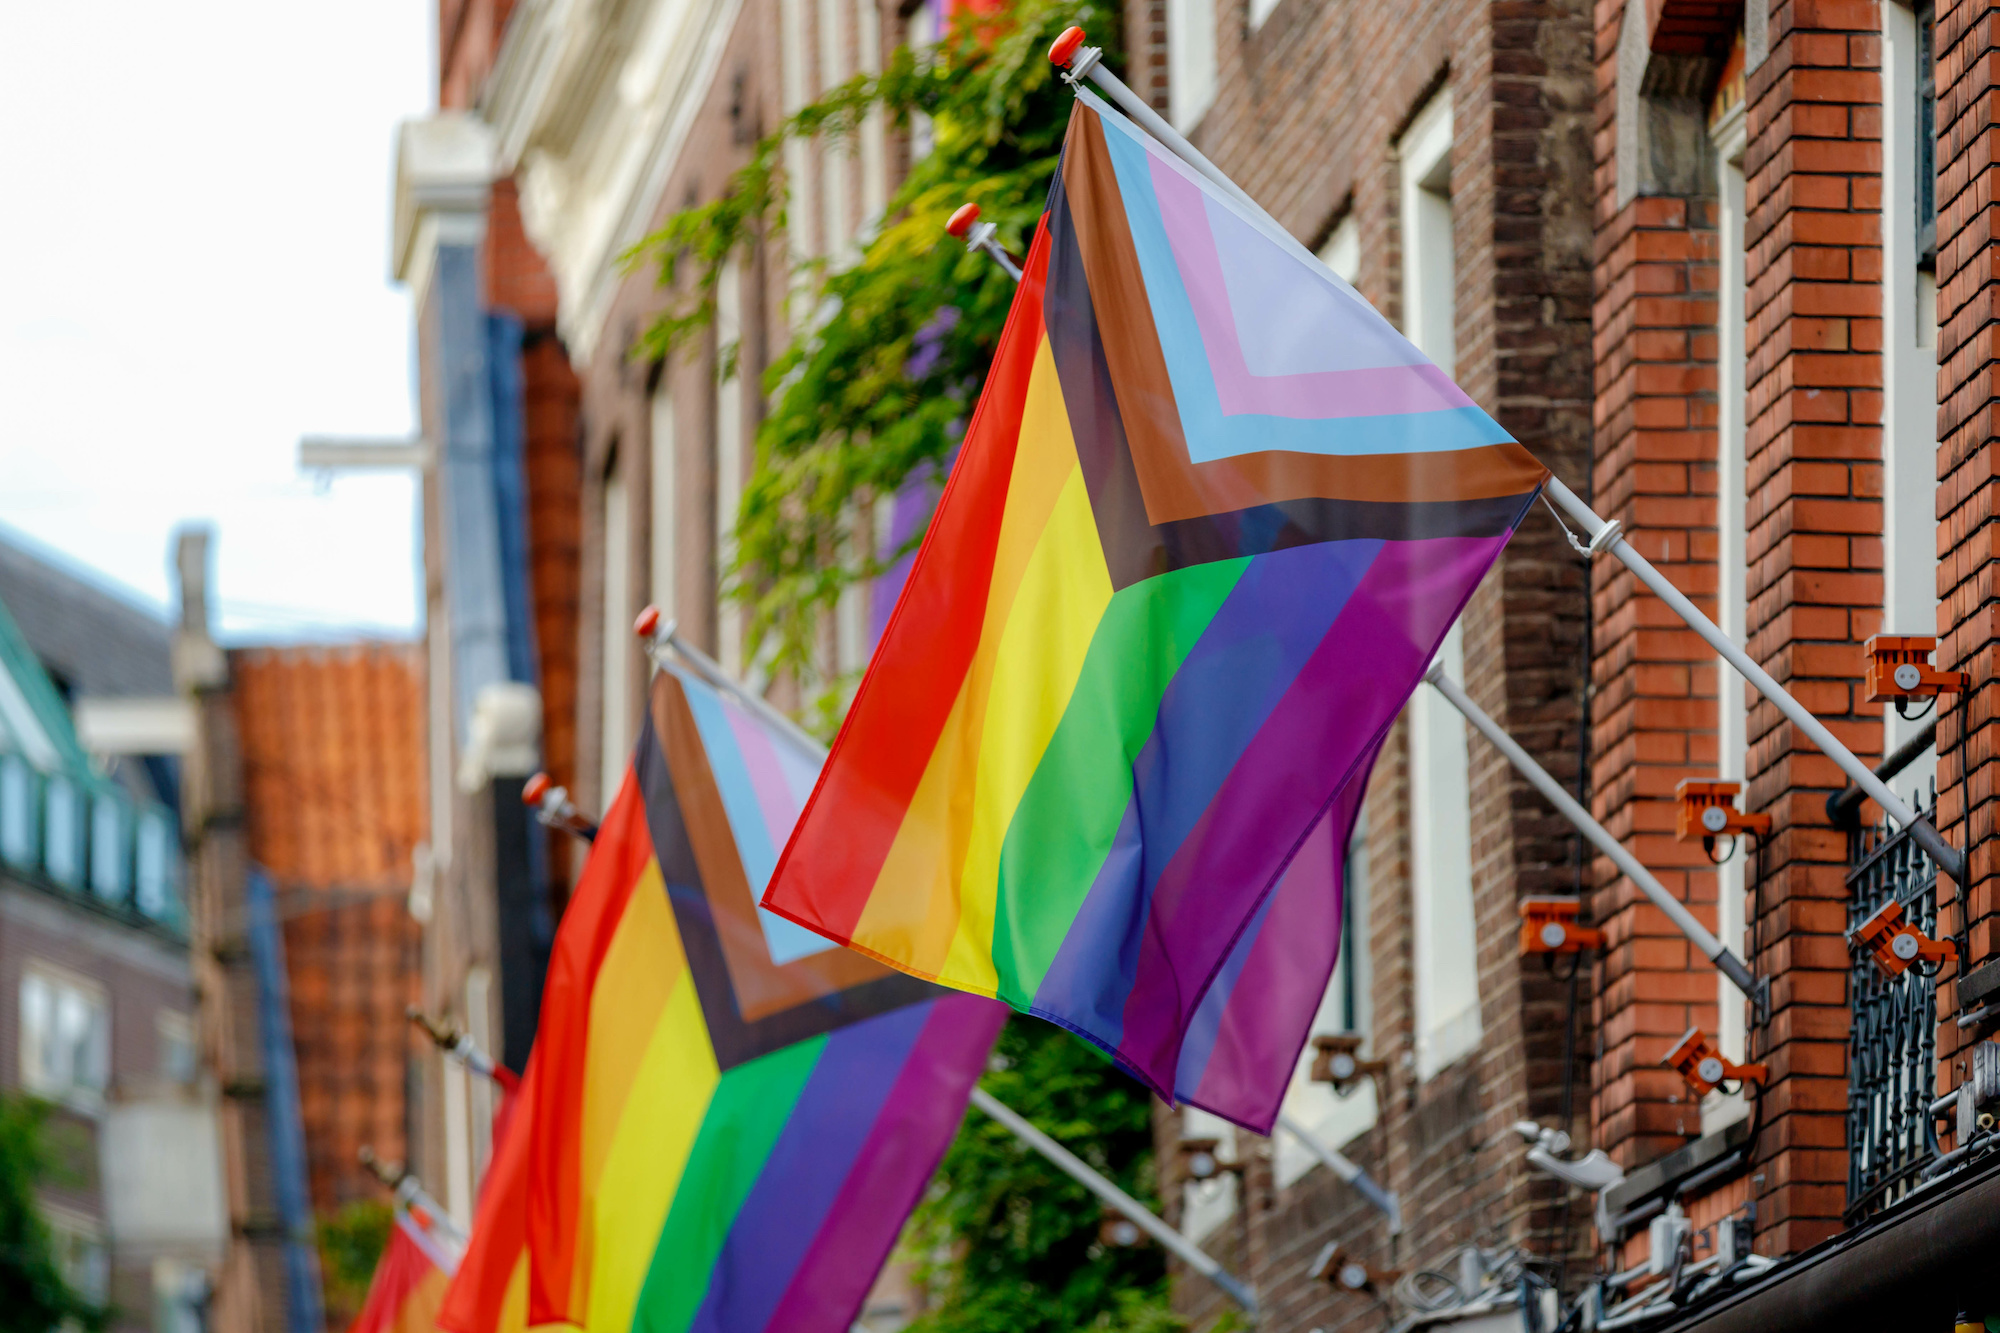 Progress Pride flags waving in the air from the side of a brick building